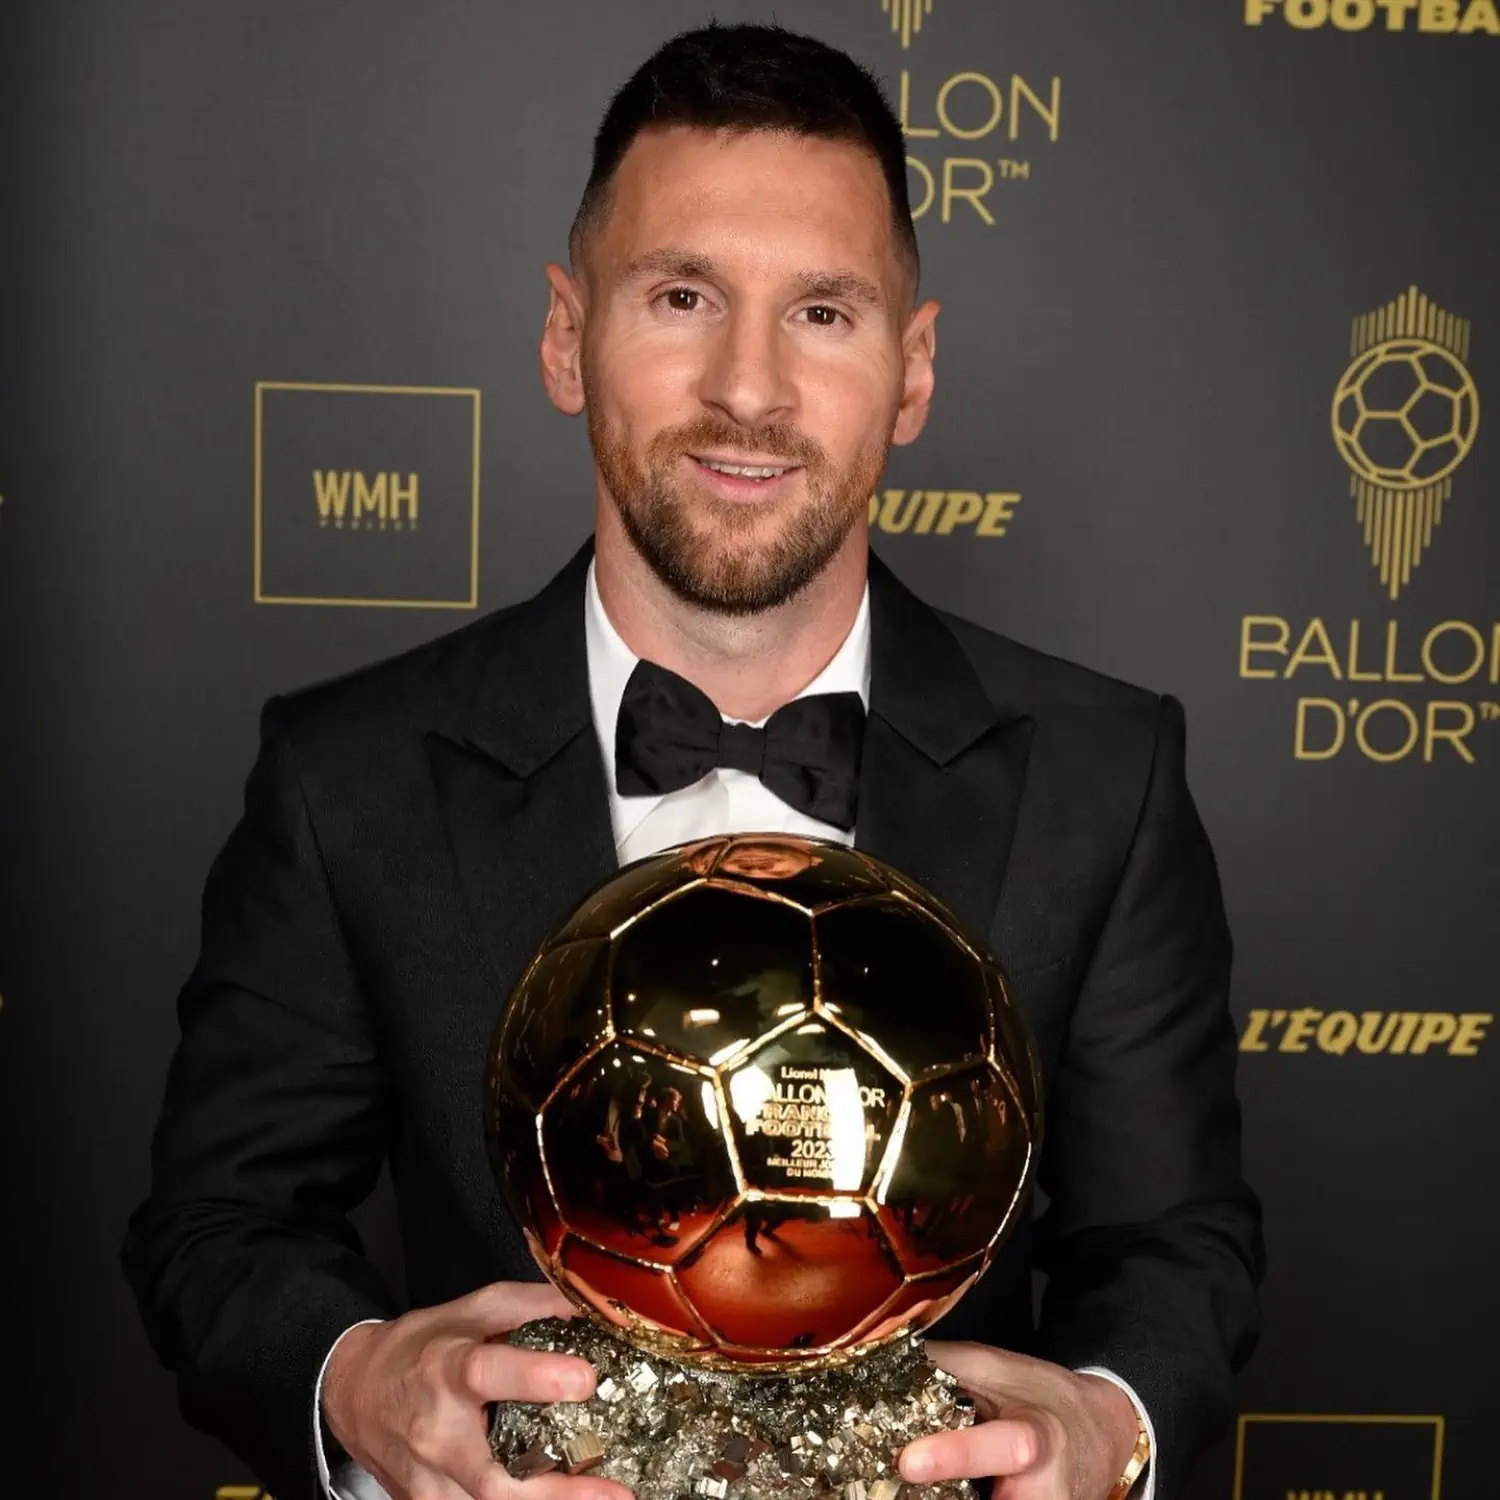 Lionel Messi scores in the world of fragrance